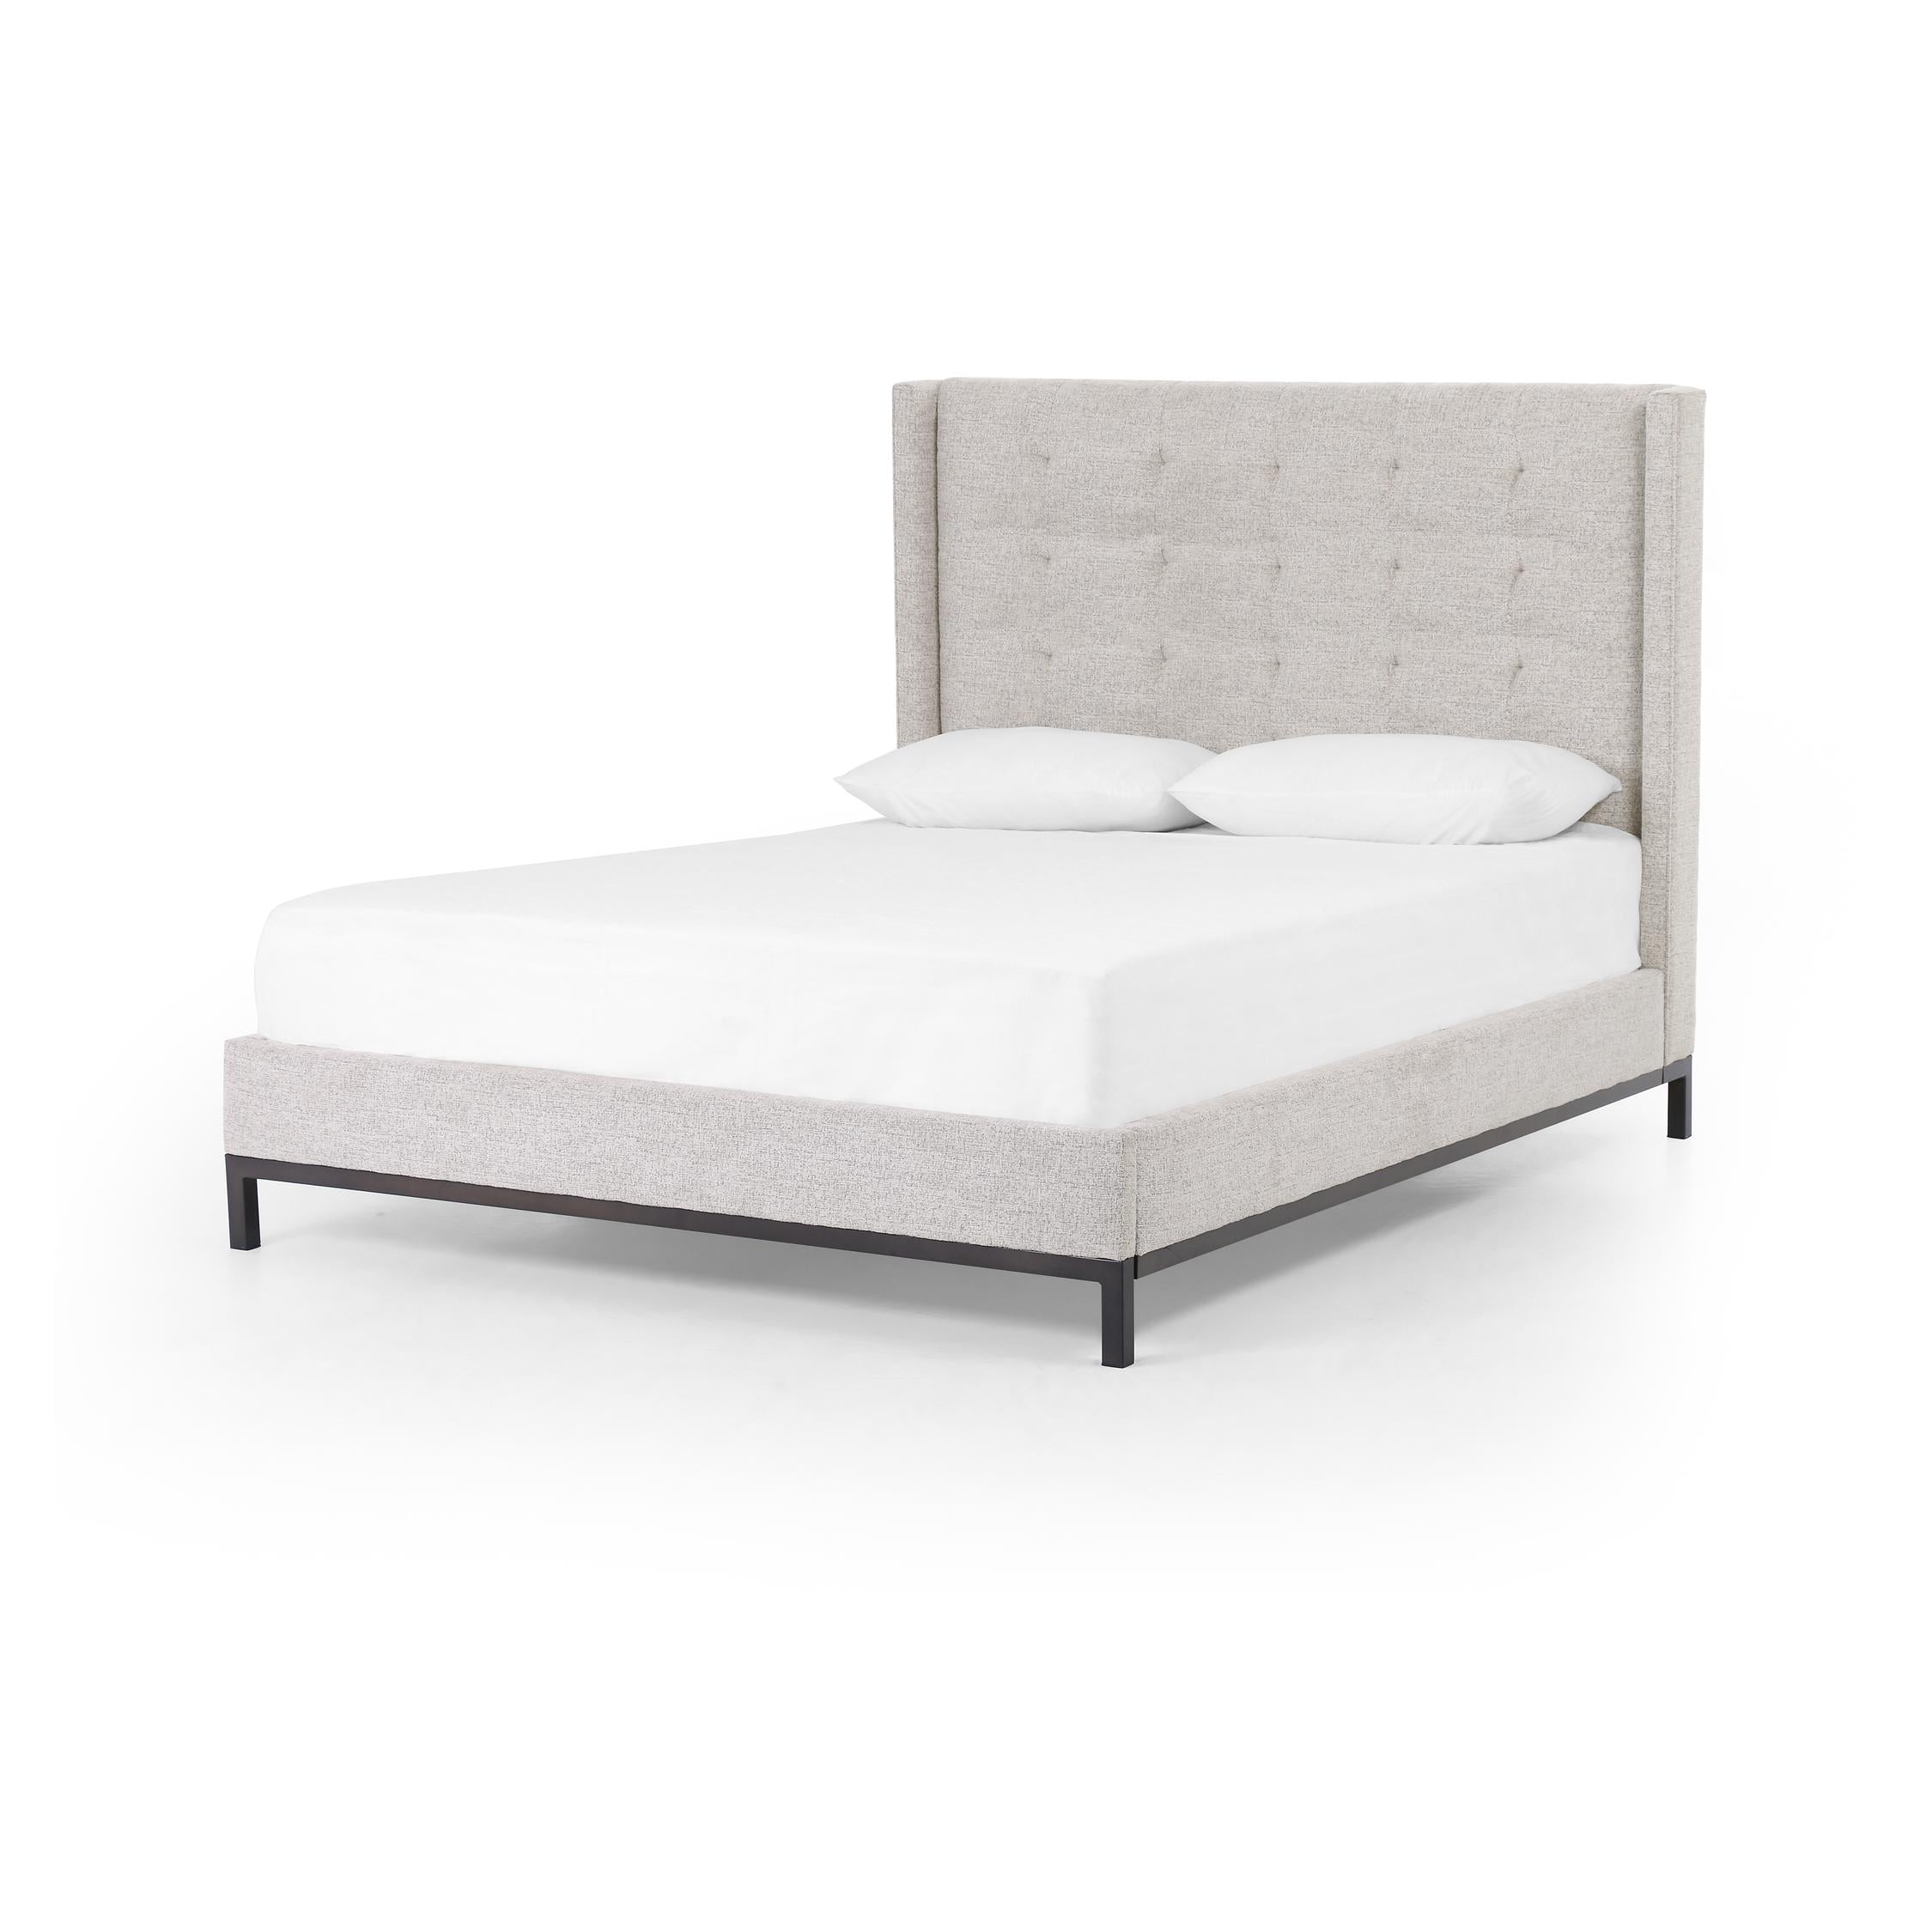 Newhall Bed 55"